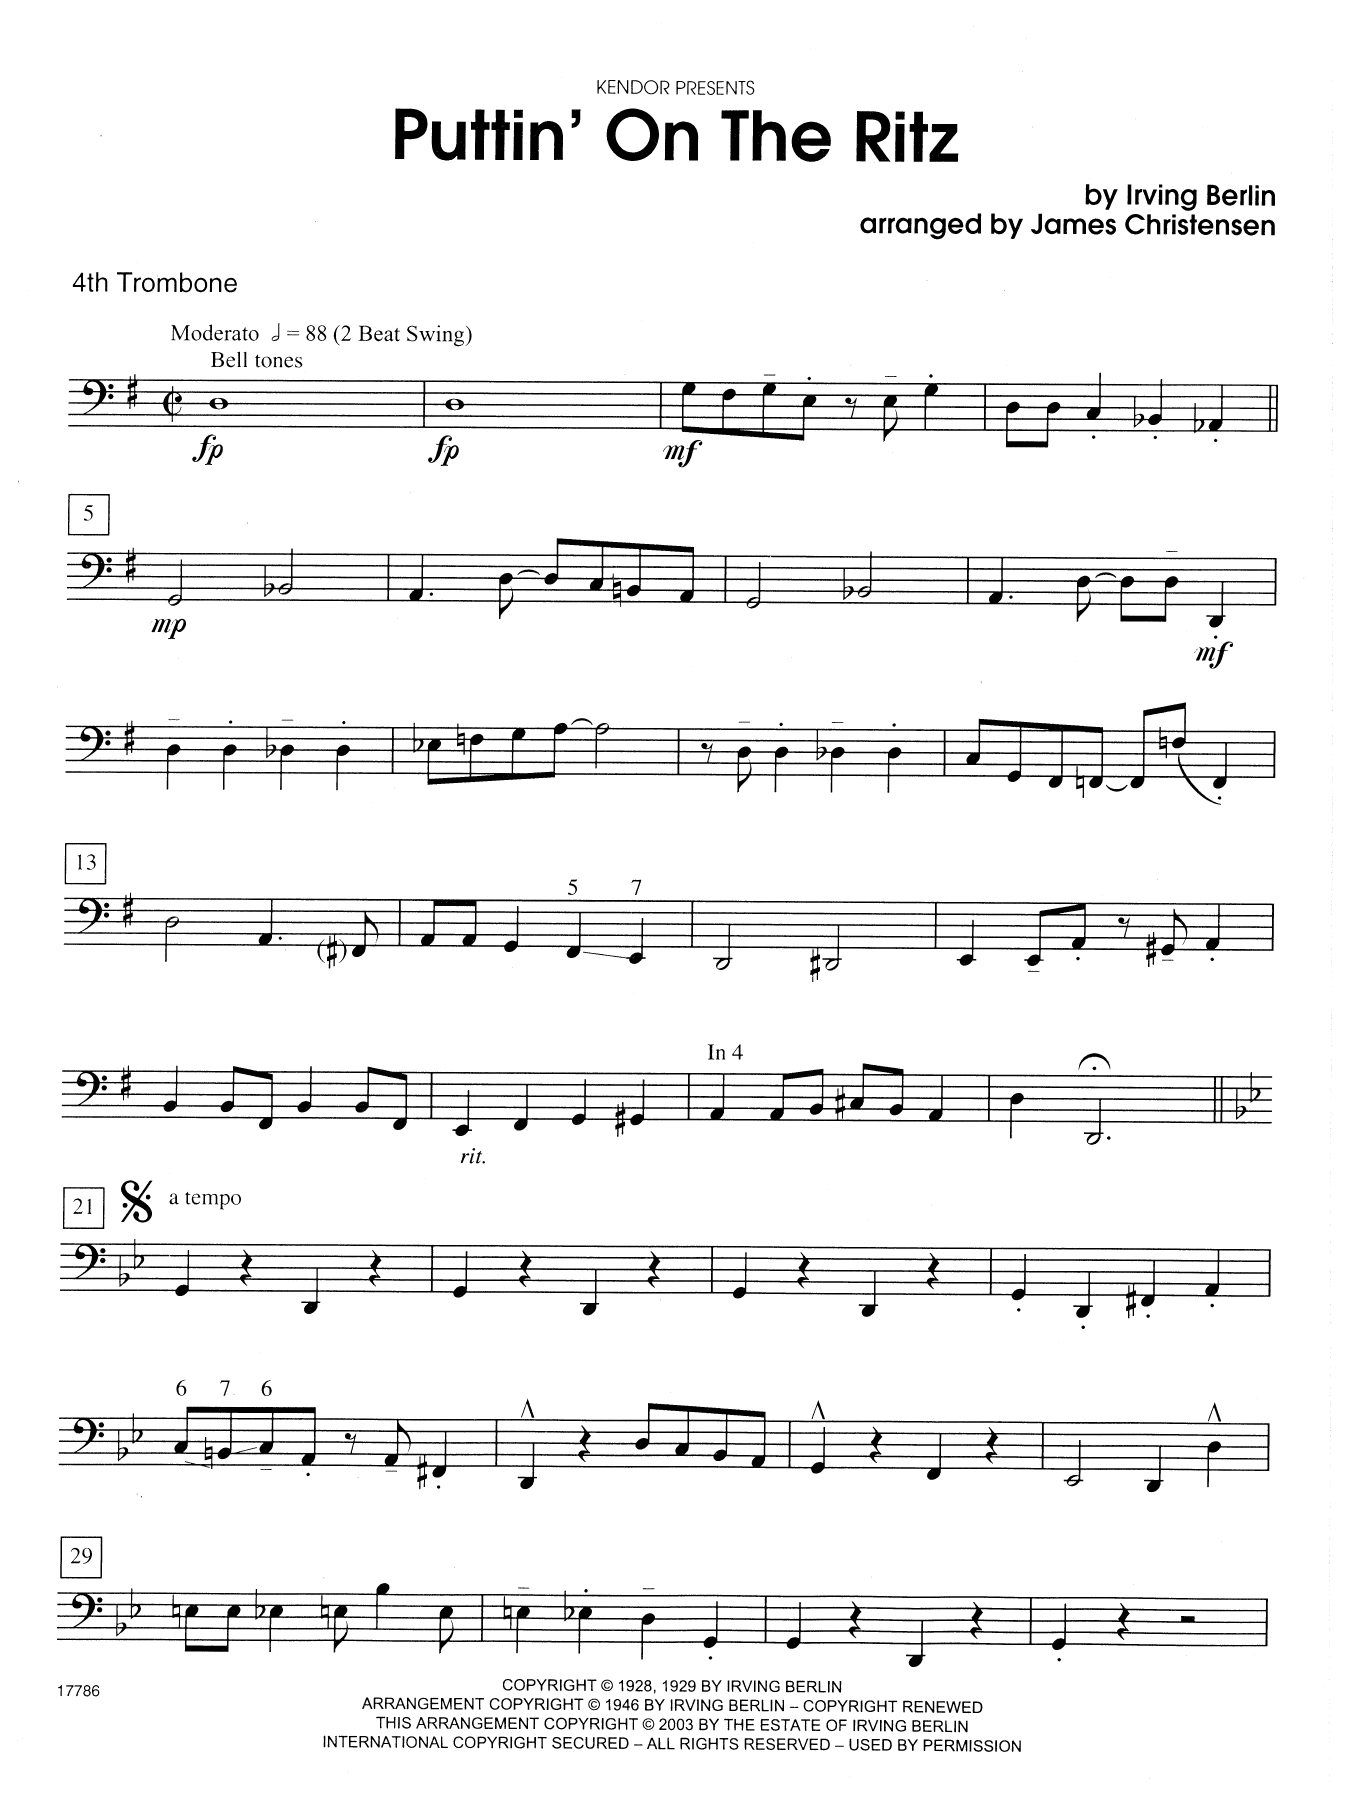 James Christensen Puttin' on the Ritz - 4th Trombone sheet music notes and chords. Download Printable PDF.